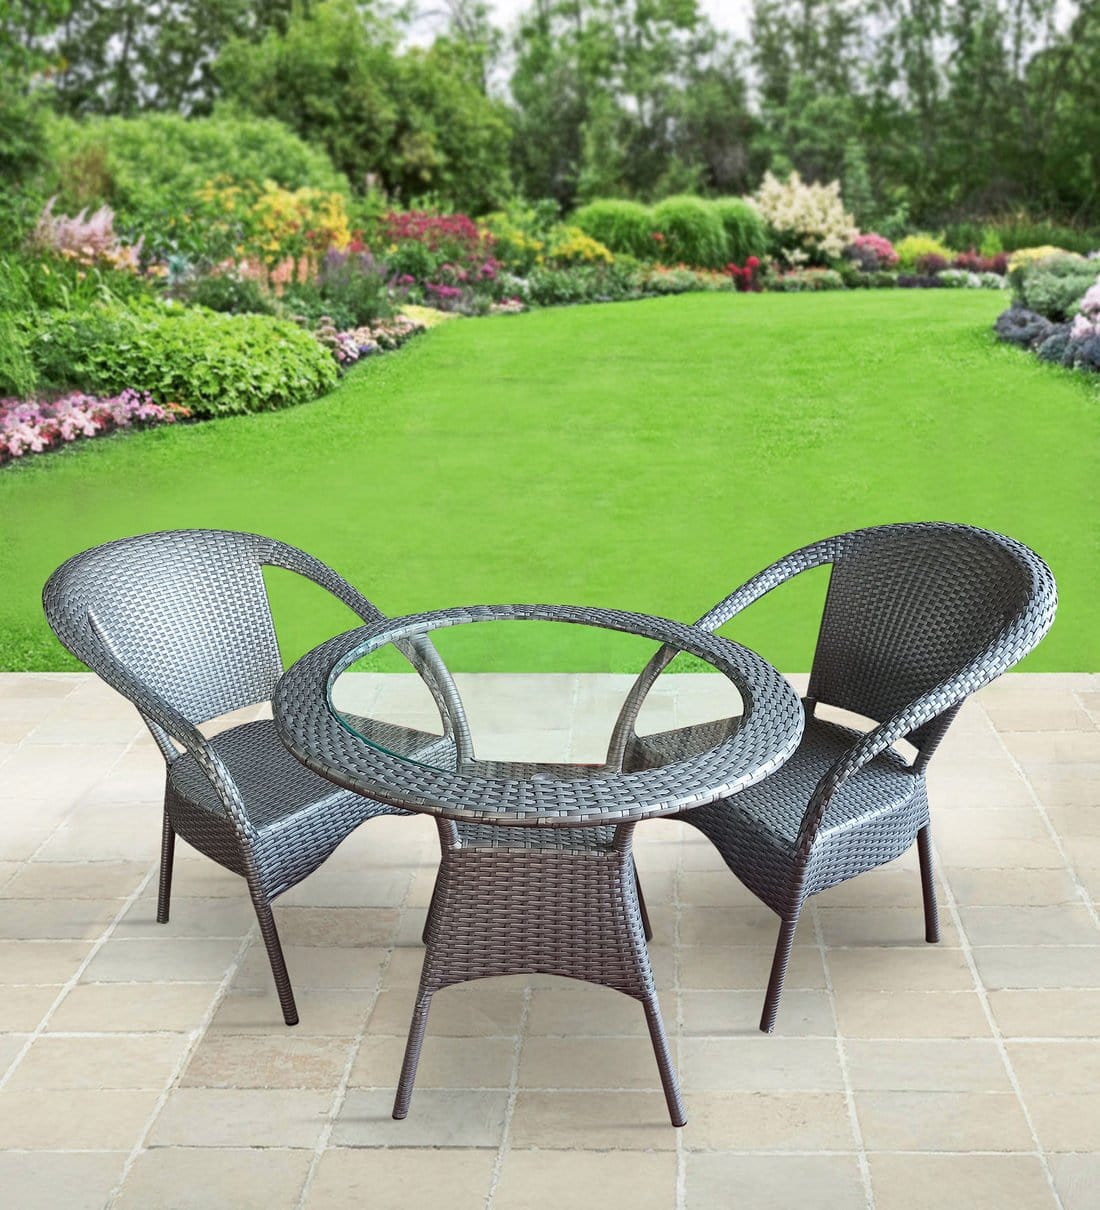 Dreamline Outdoor Garden/Balcony Patio Seating Set 1+4, 4 Chairs And Table Set (Silver)